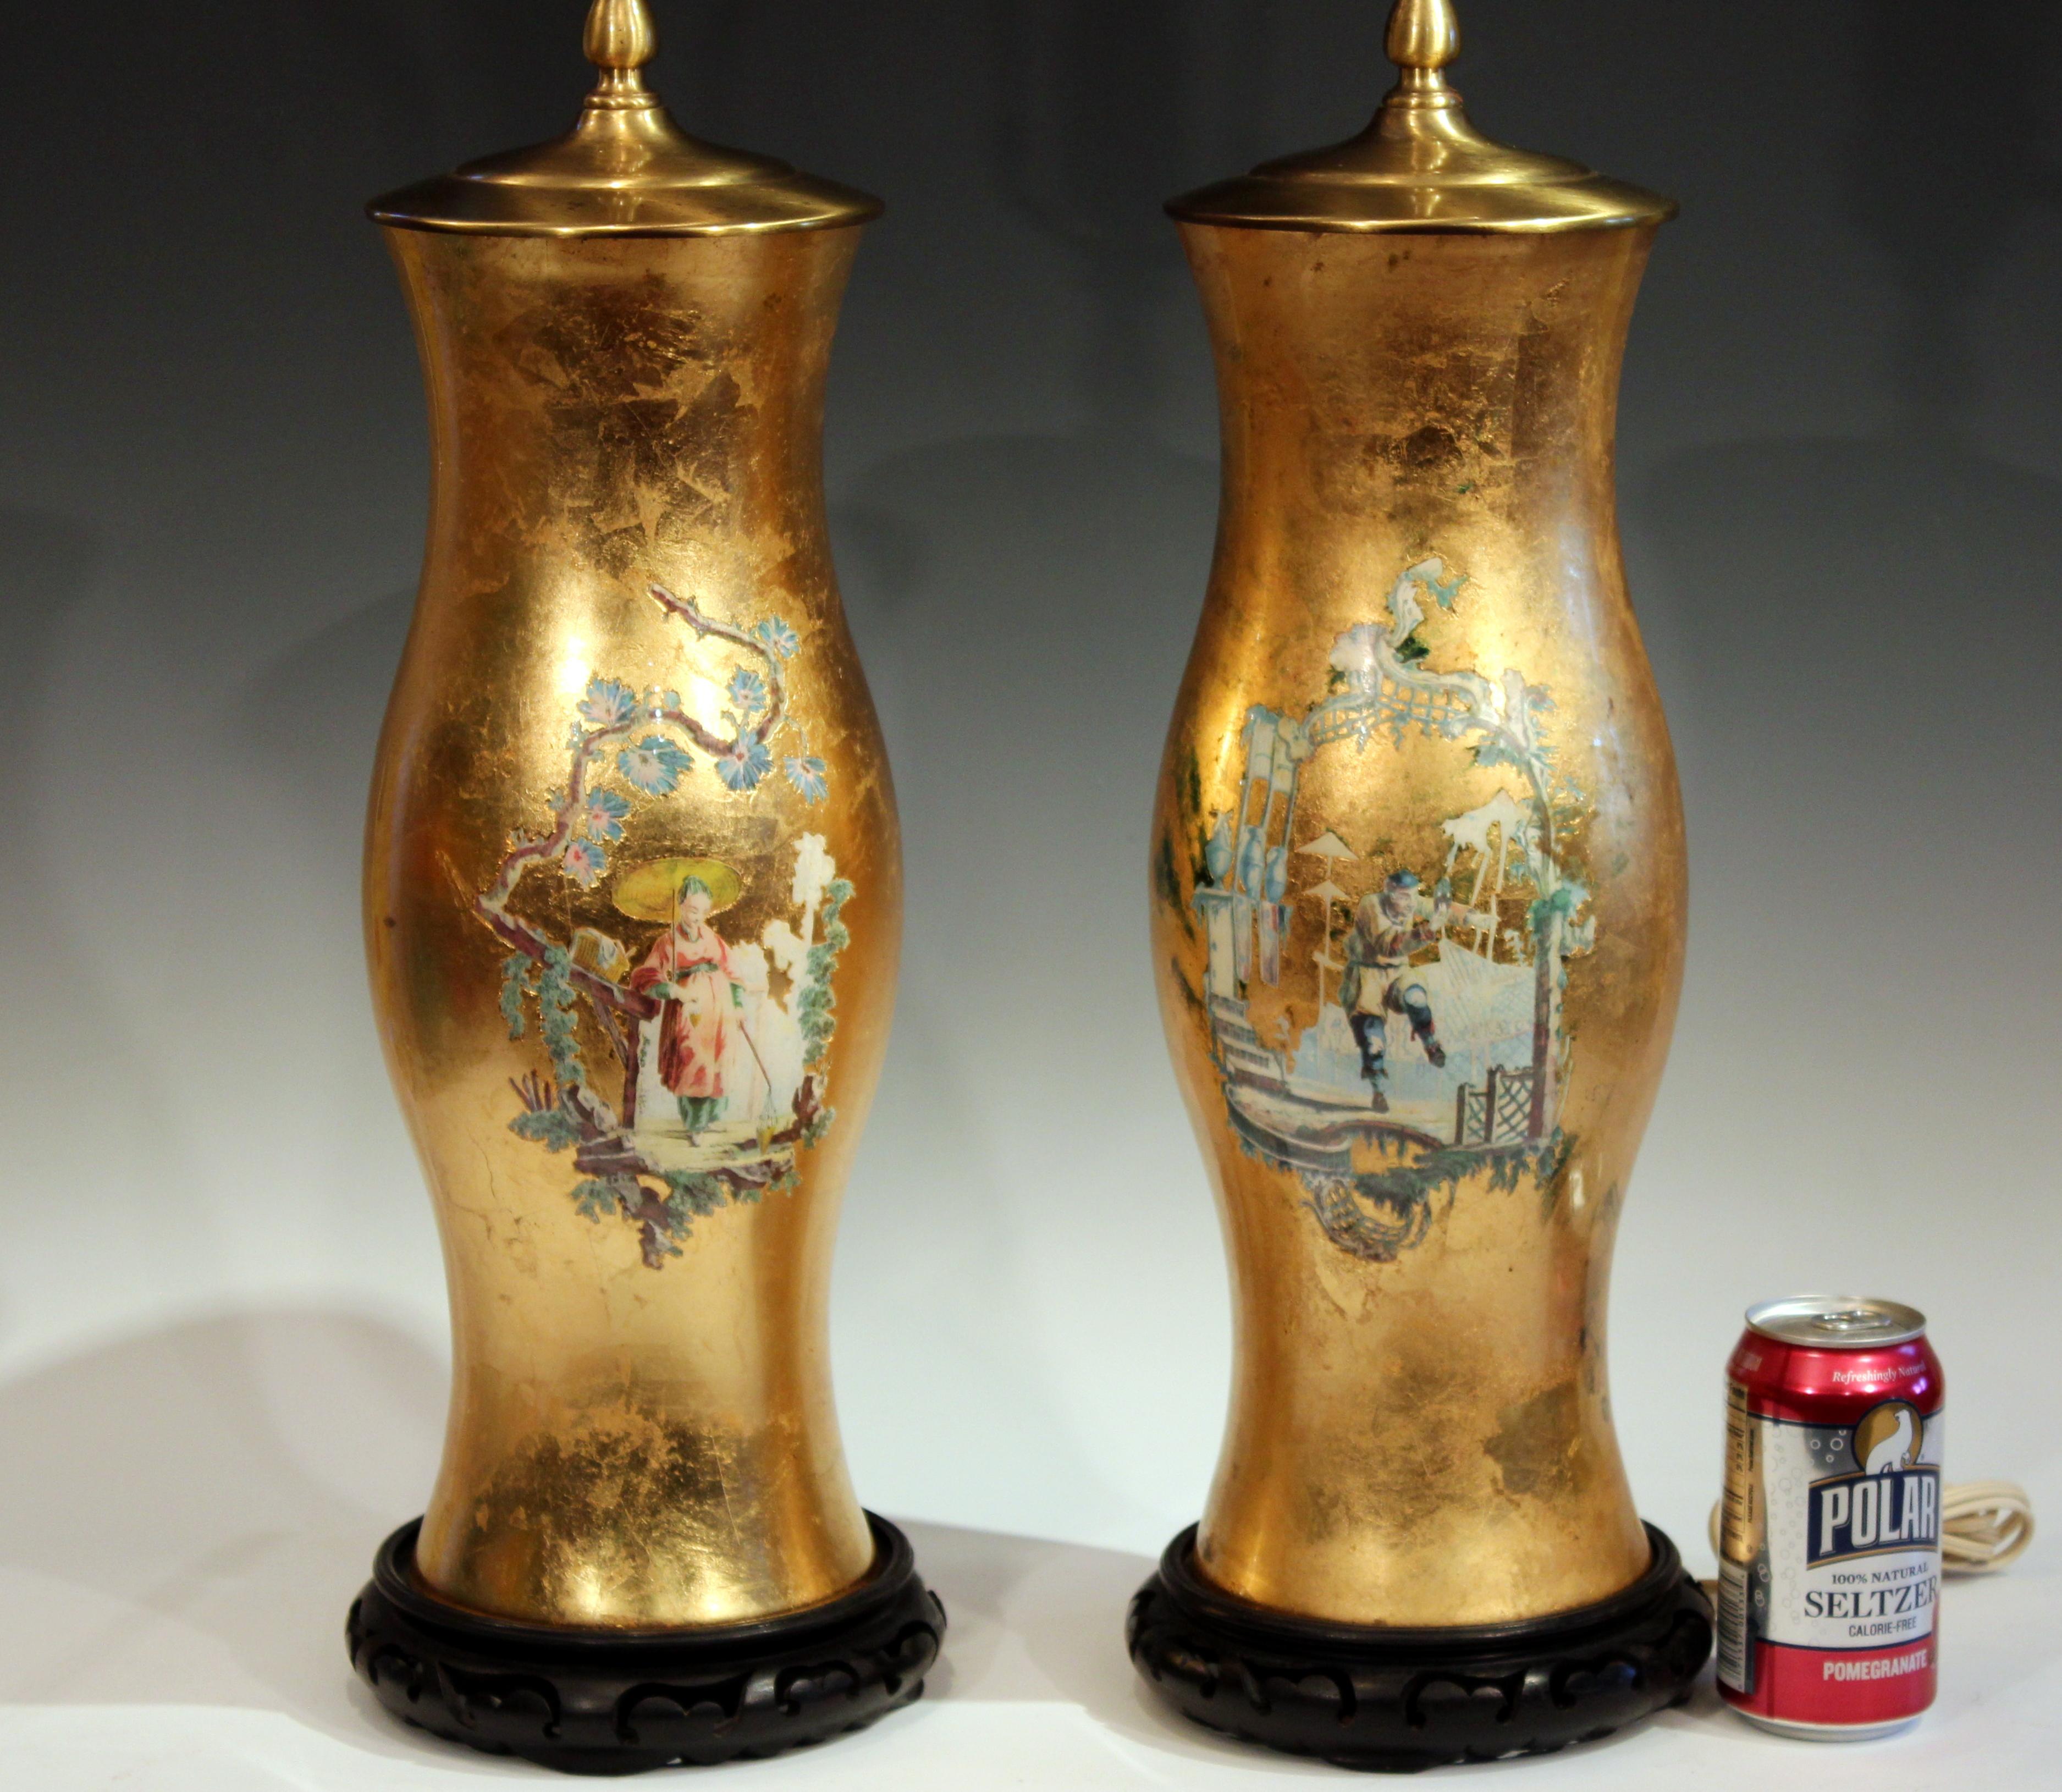 Vintage pair of églomisé decalcomania lamps with chinoiserie garden scenes and floral borders on a gold gilt ground, circa 1980s. Measures 36